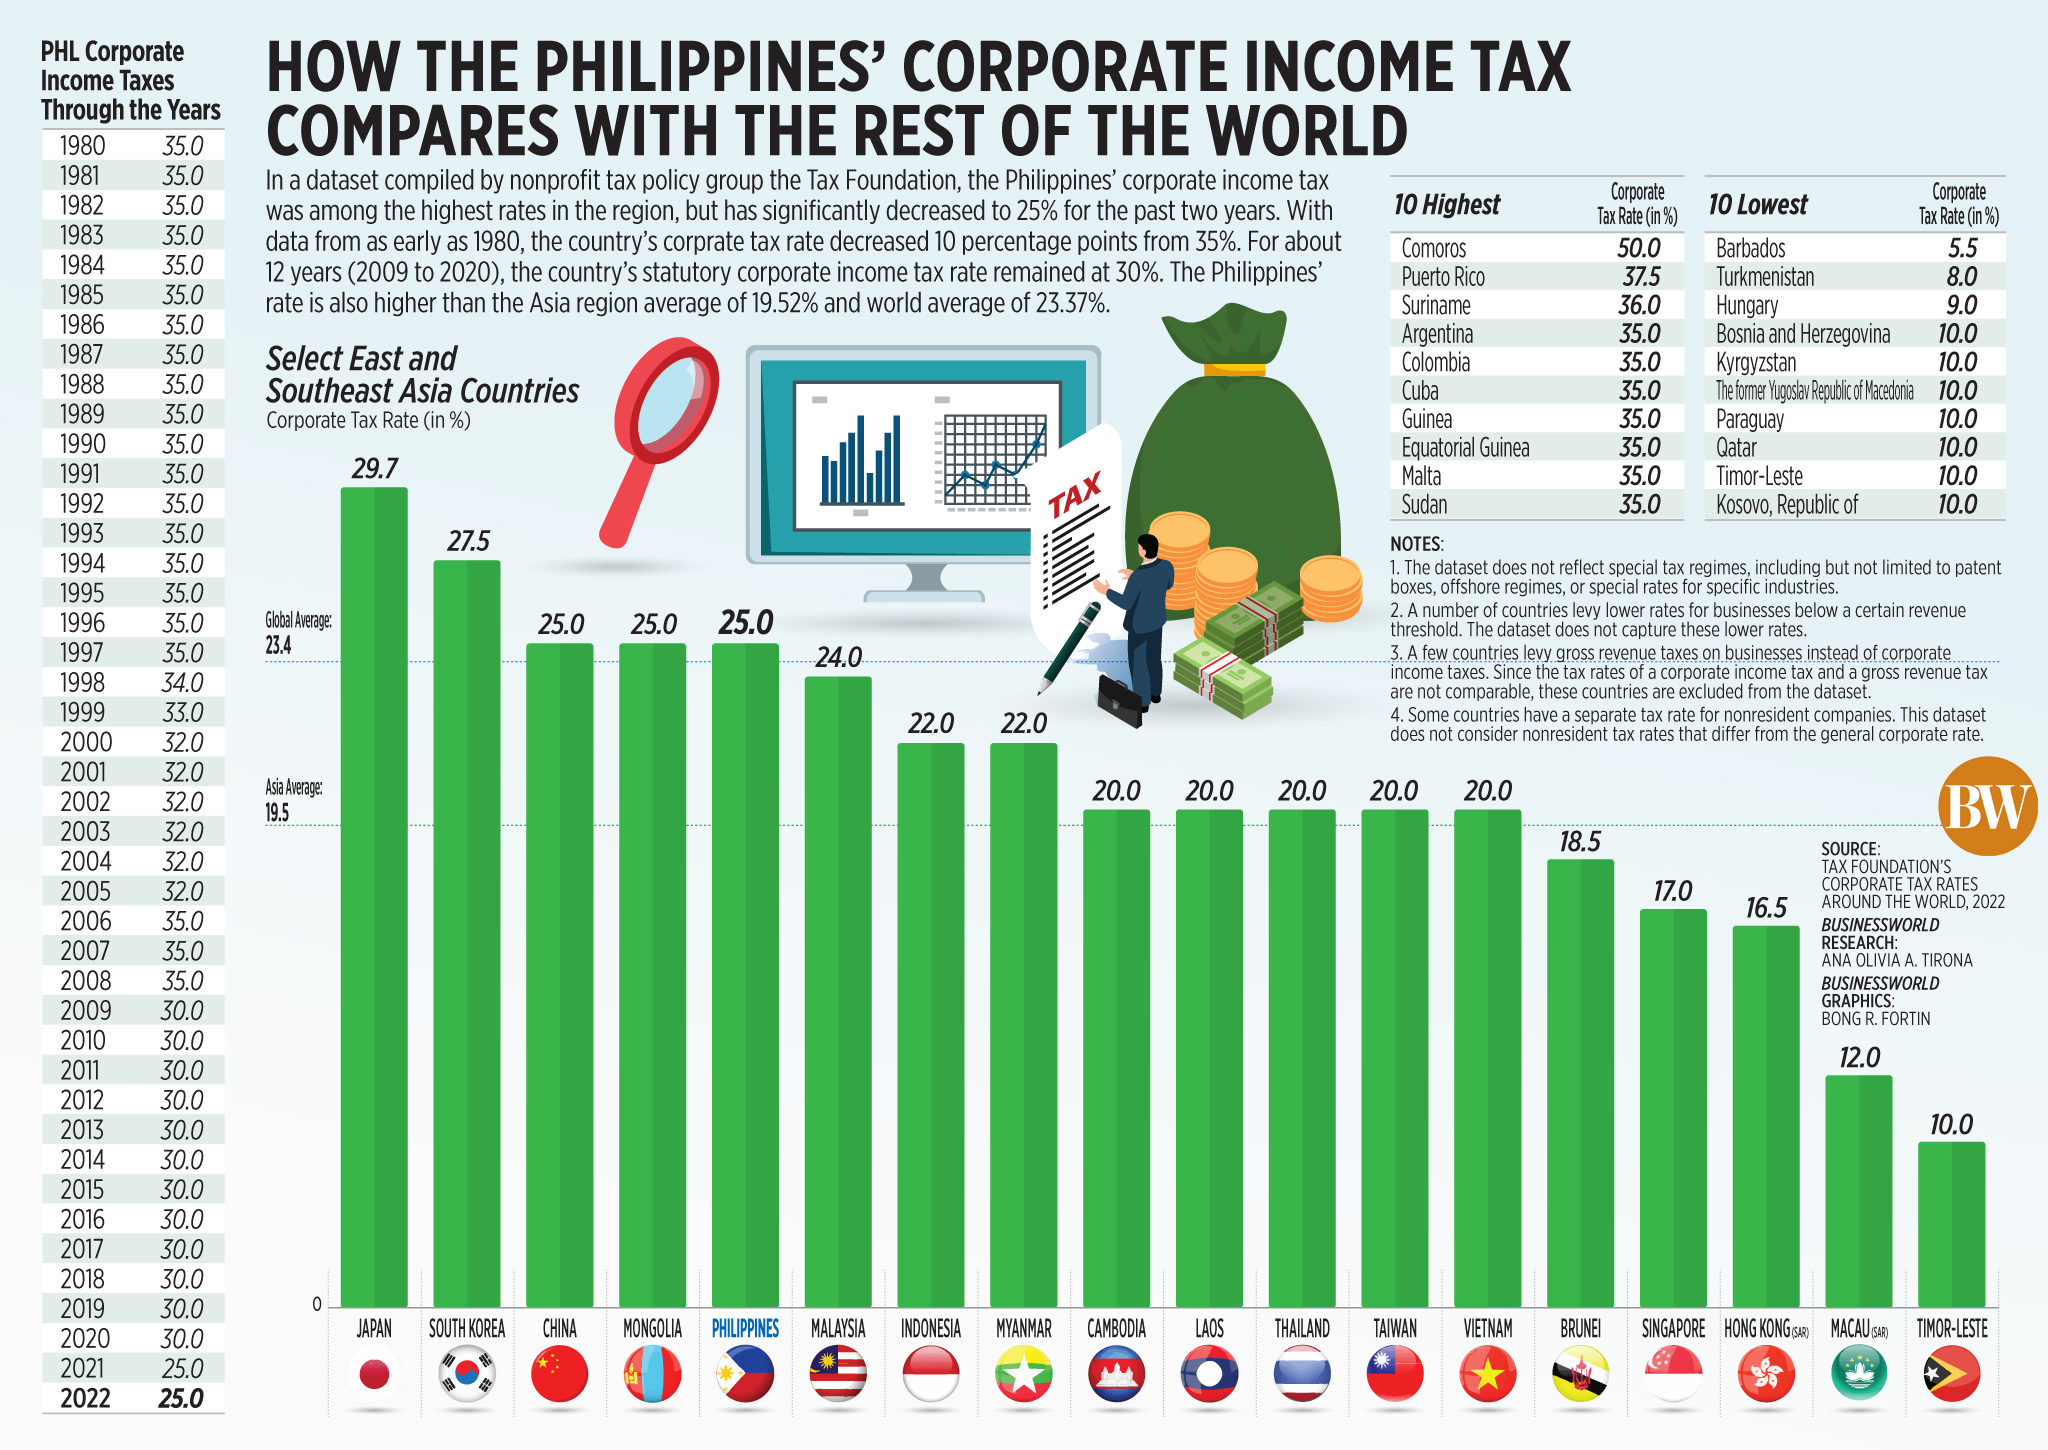 How the Philippines’ corporate income tax compares with the rest of the world